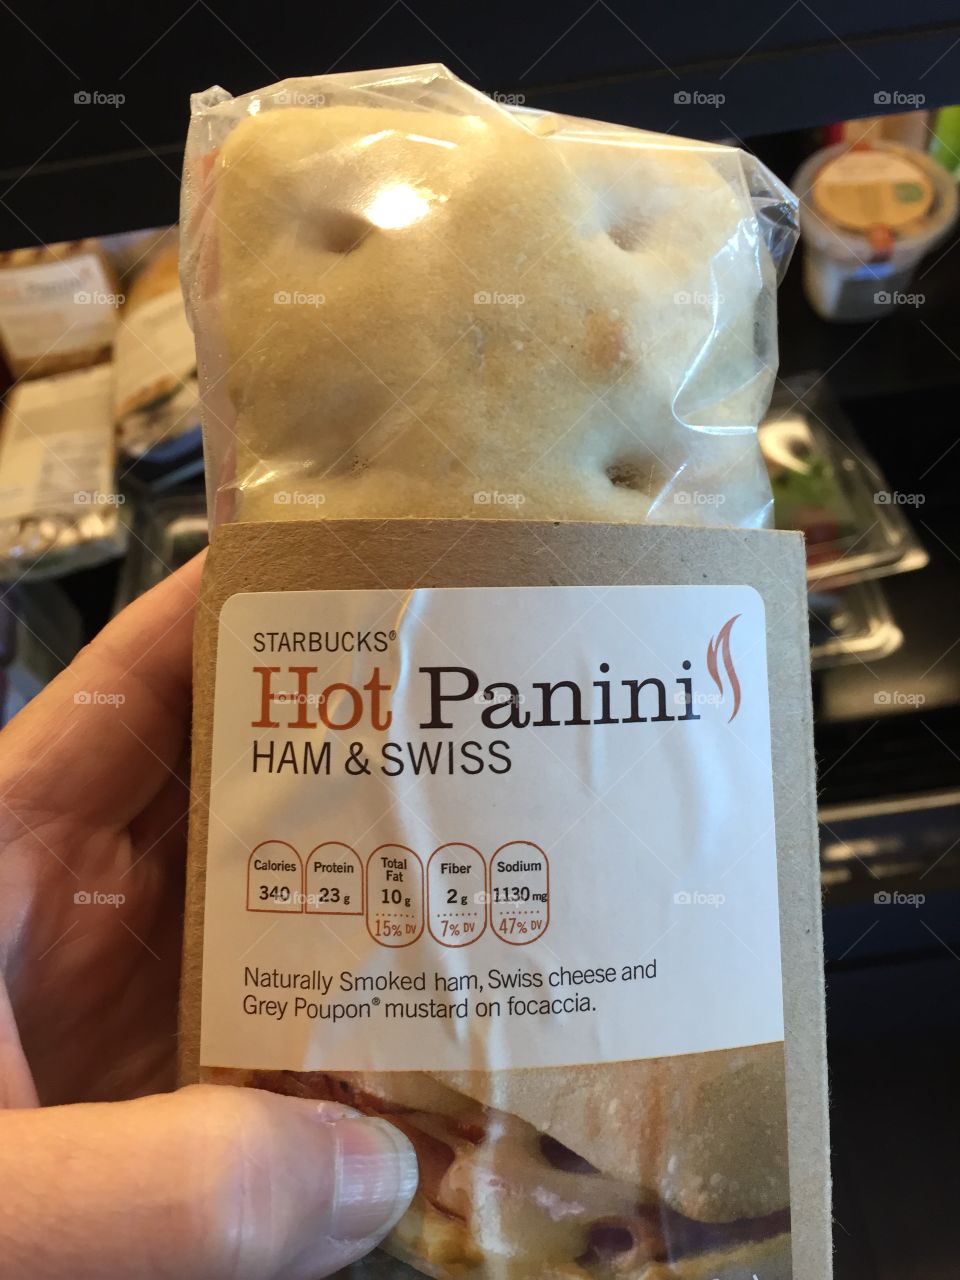 This is a hot Panini